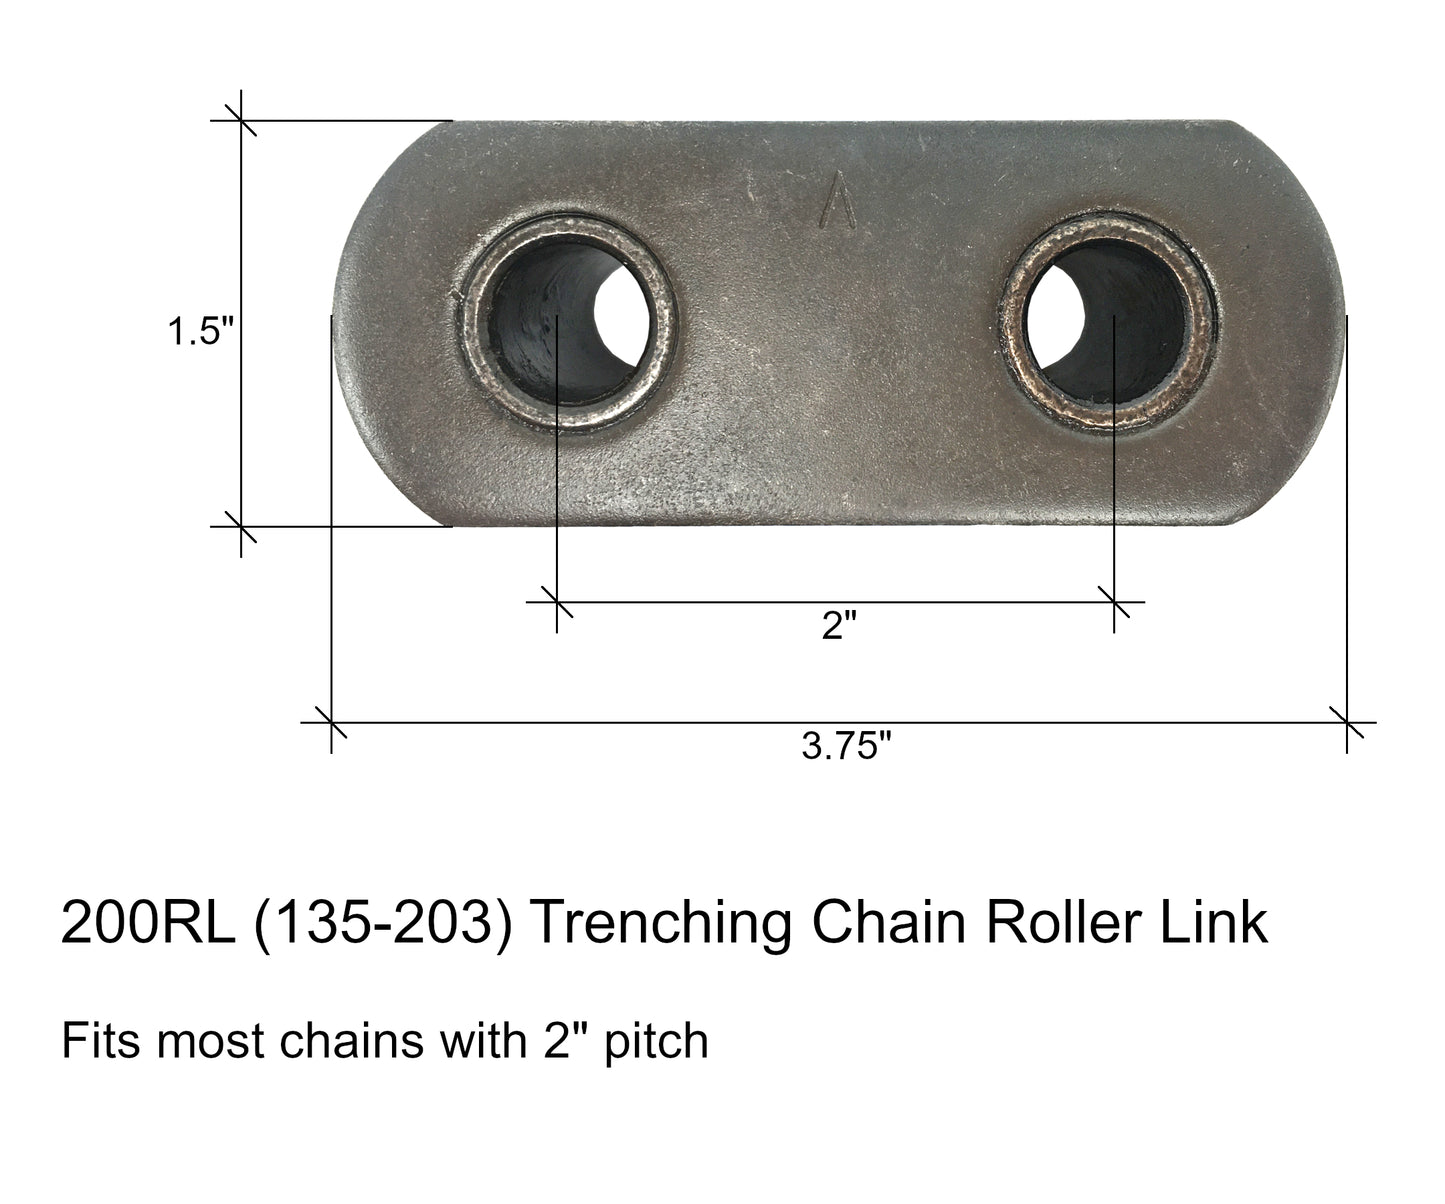 Trenching Chain Roller Link, Fits Chains w/ 2" Pitch - 135-203, 200RL